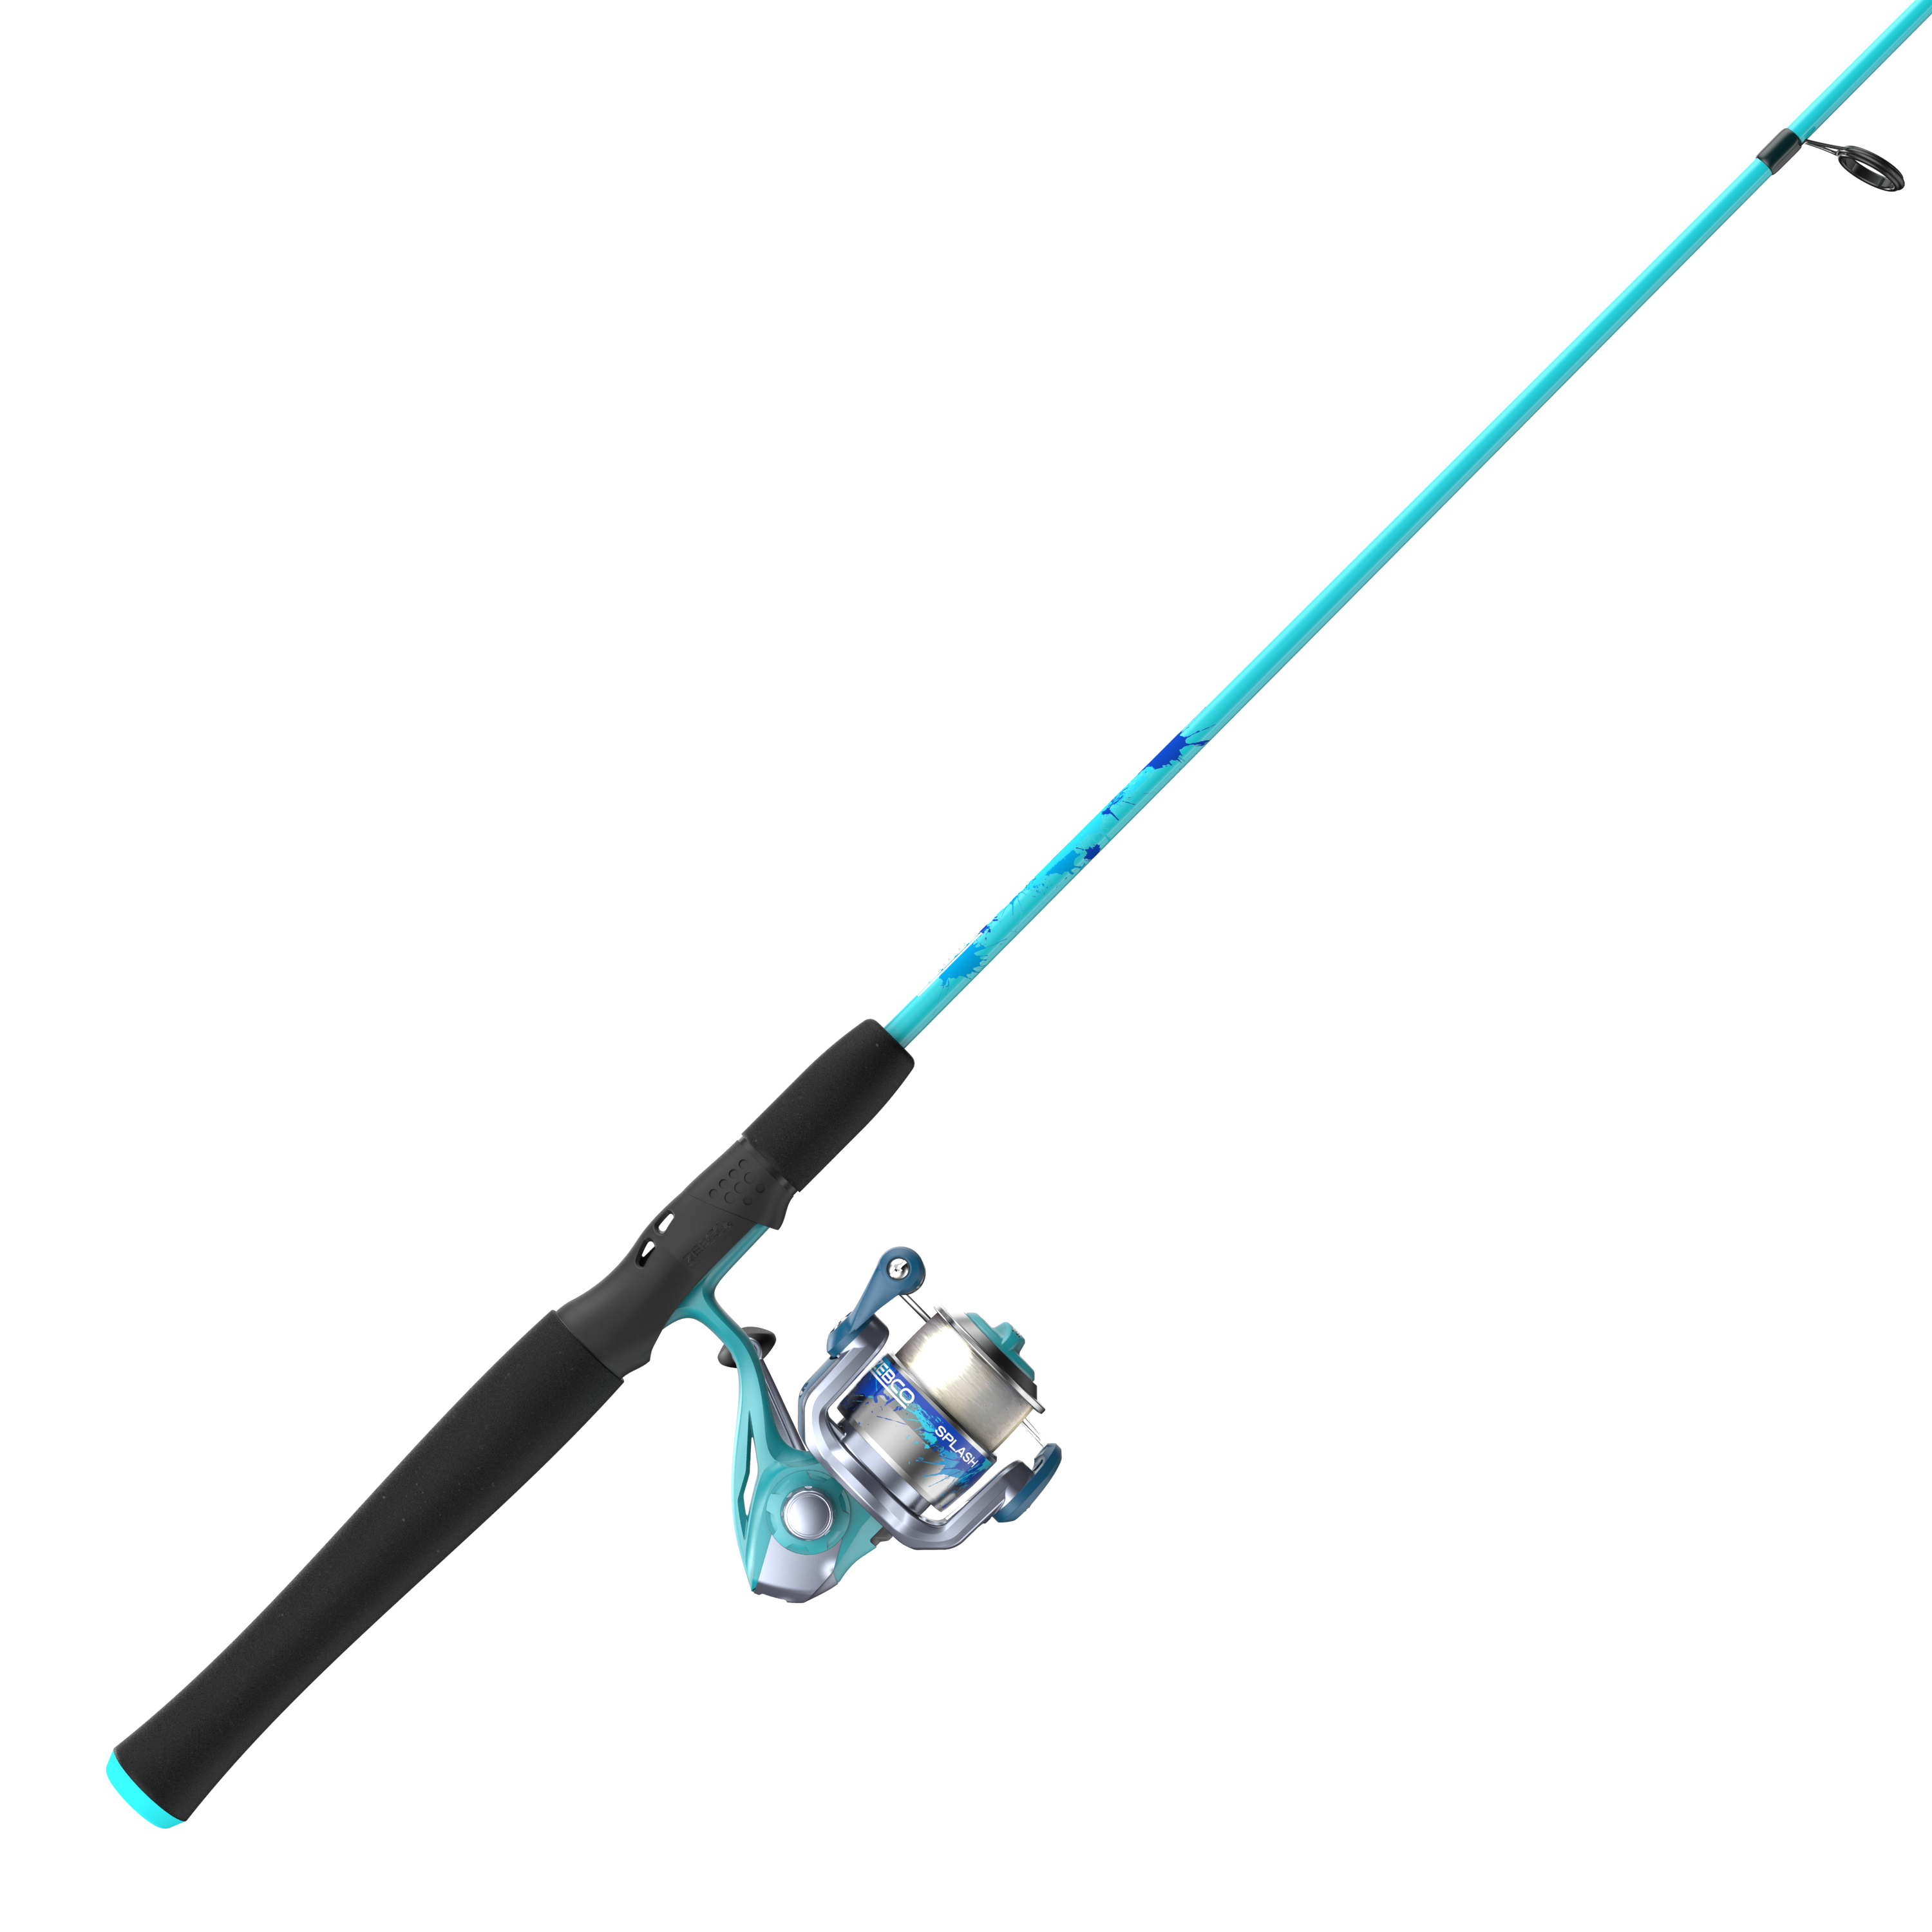  Zebco Kids Rambler Spincast Reel and Fishing Rod Combo, 5-Foot  3-Inch 2-Piece Fishing Pole, Size 30 Reel, Changeable Right- or Left-Hand  Retrieve, Pre-Spooled with 8-Pound Zebco Cajun Line : Everything Else